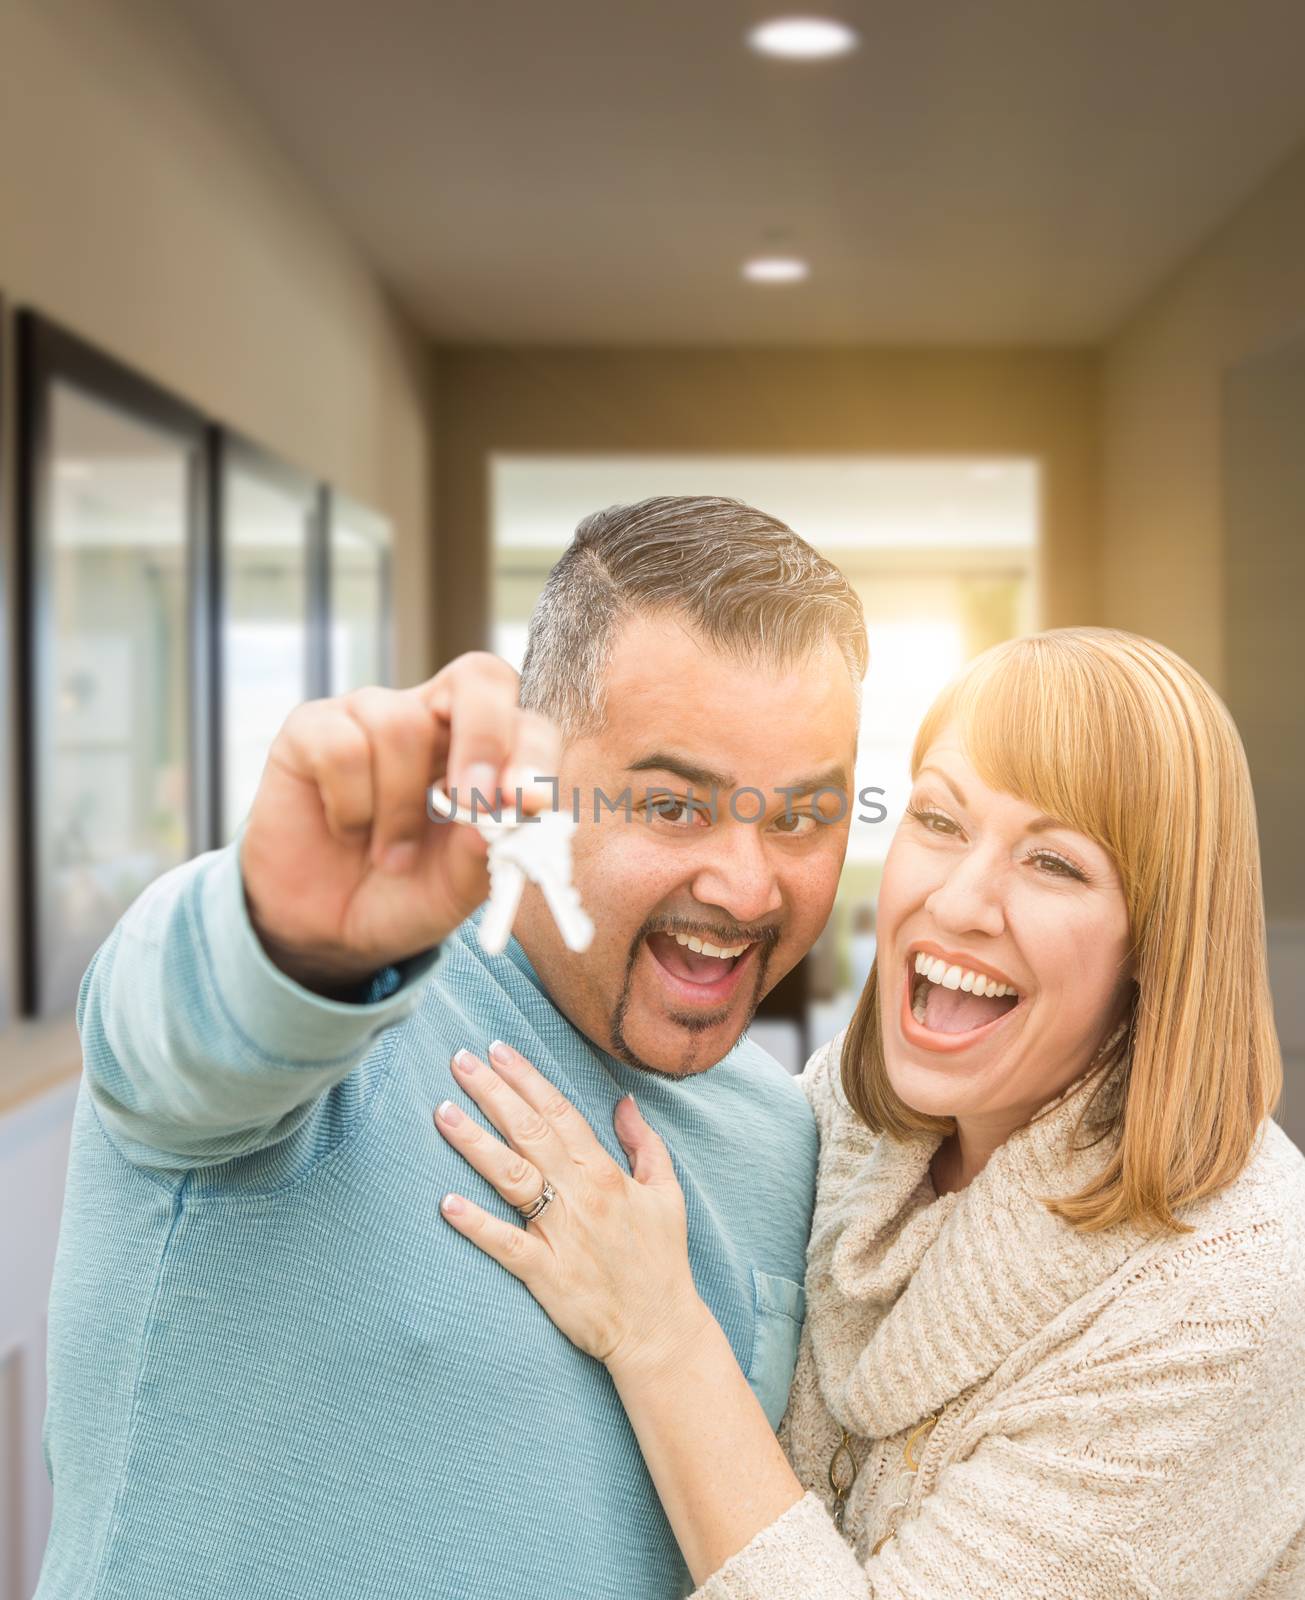 Couple Holding House Keys Inside Hallway of Their New Home by Feverpitched